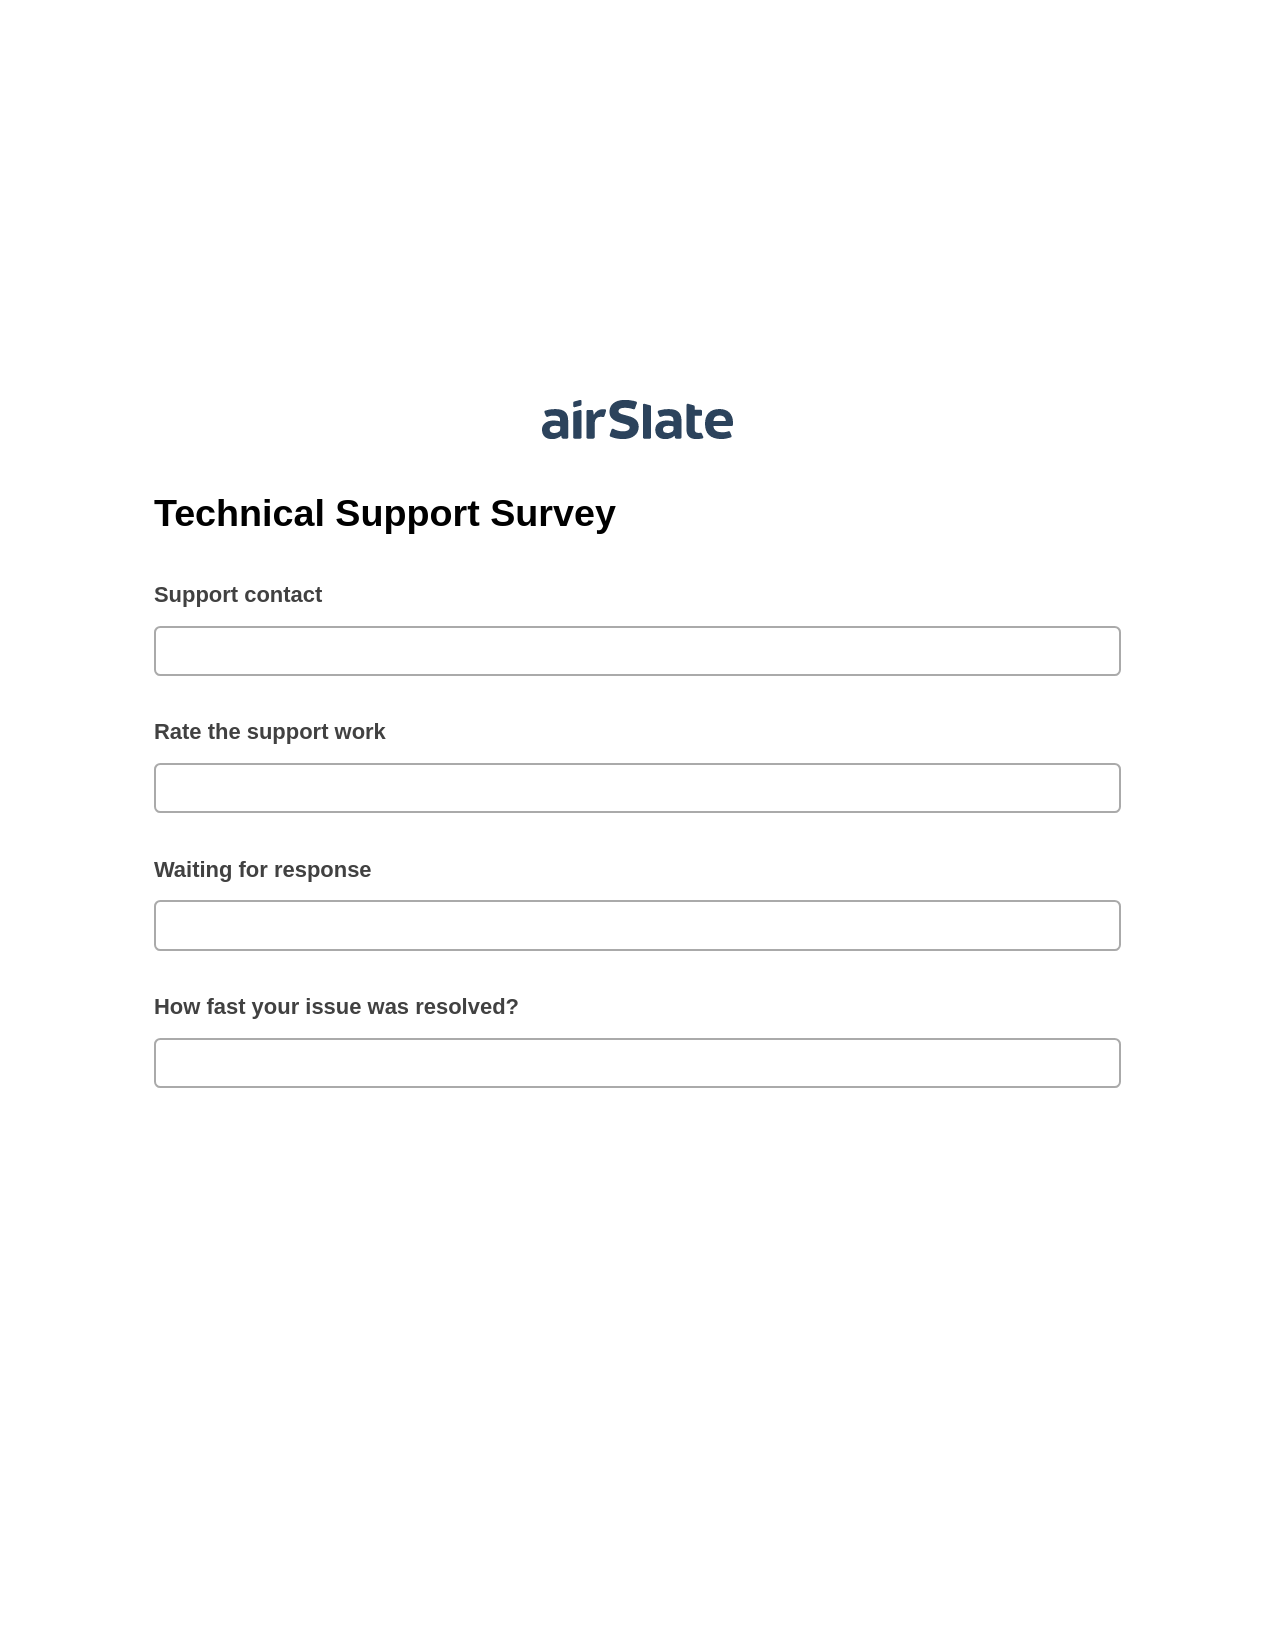 Technical Support Survey Pre-fill from Excel Spreadsheet Bot, Remove Tags From Slate Bot, Export to WebMerge Bot